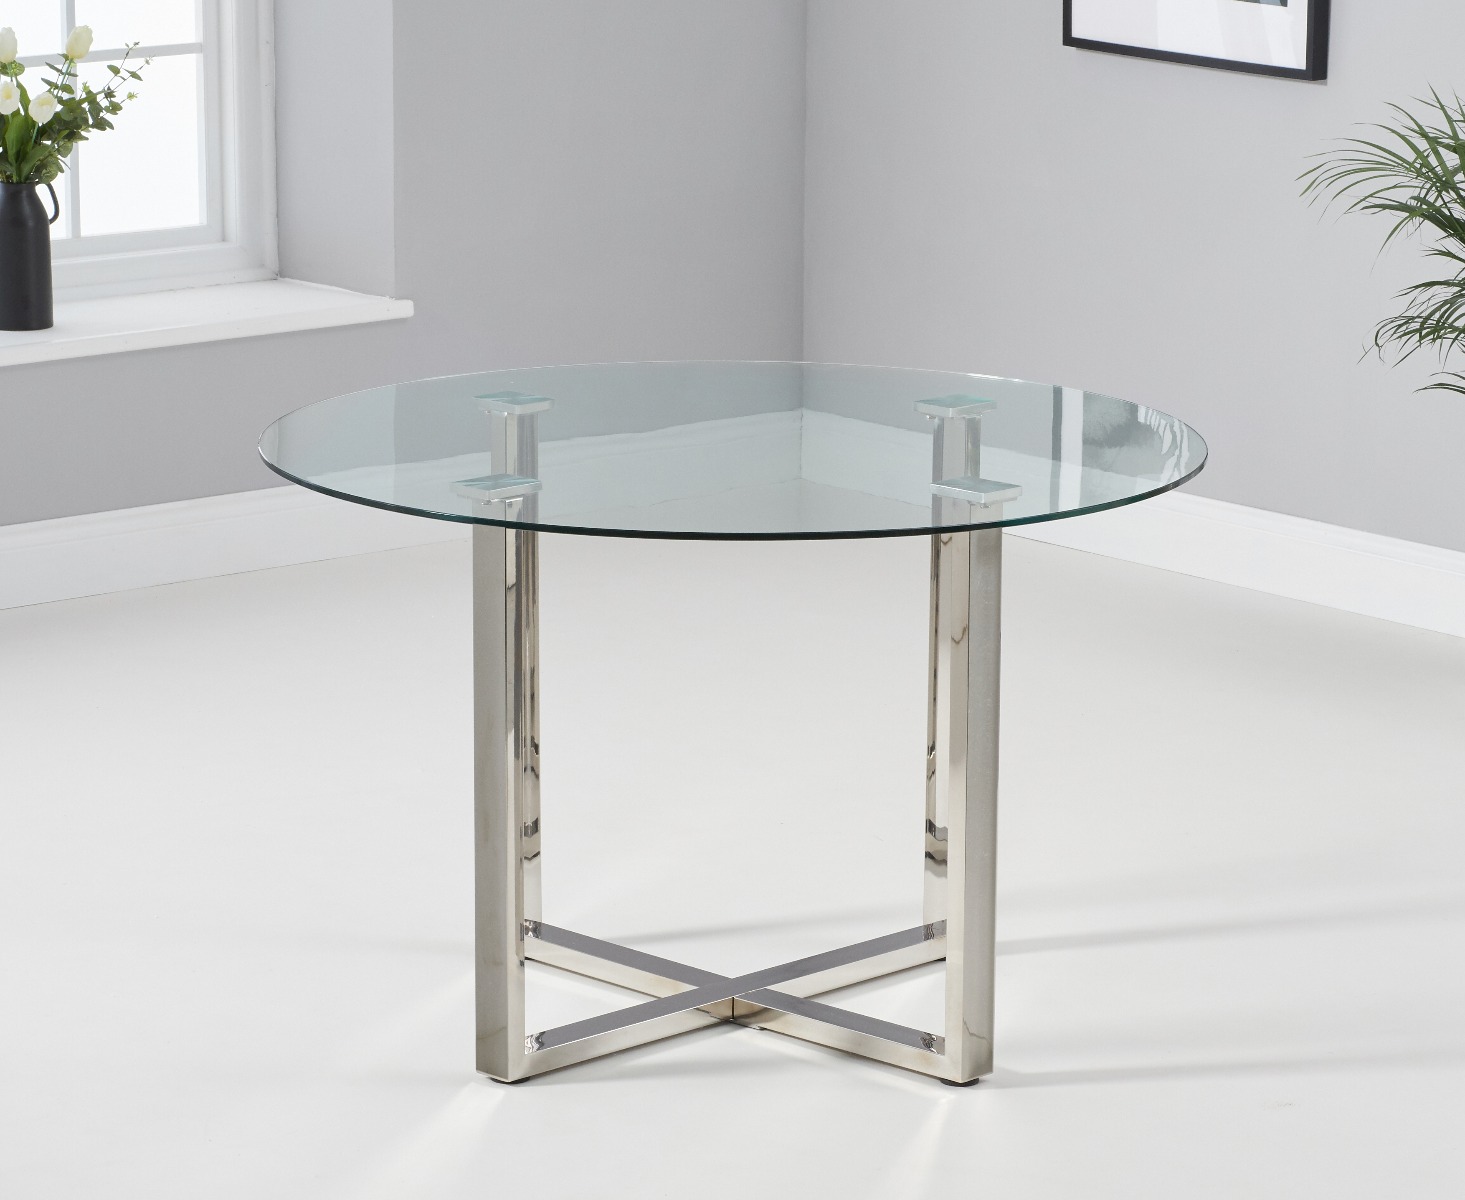 Photo 2 of Vaso 120cm round glass dining table with 4 black enzo chairs